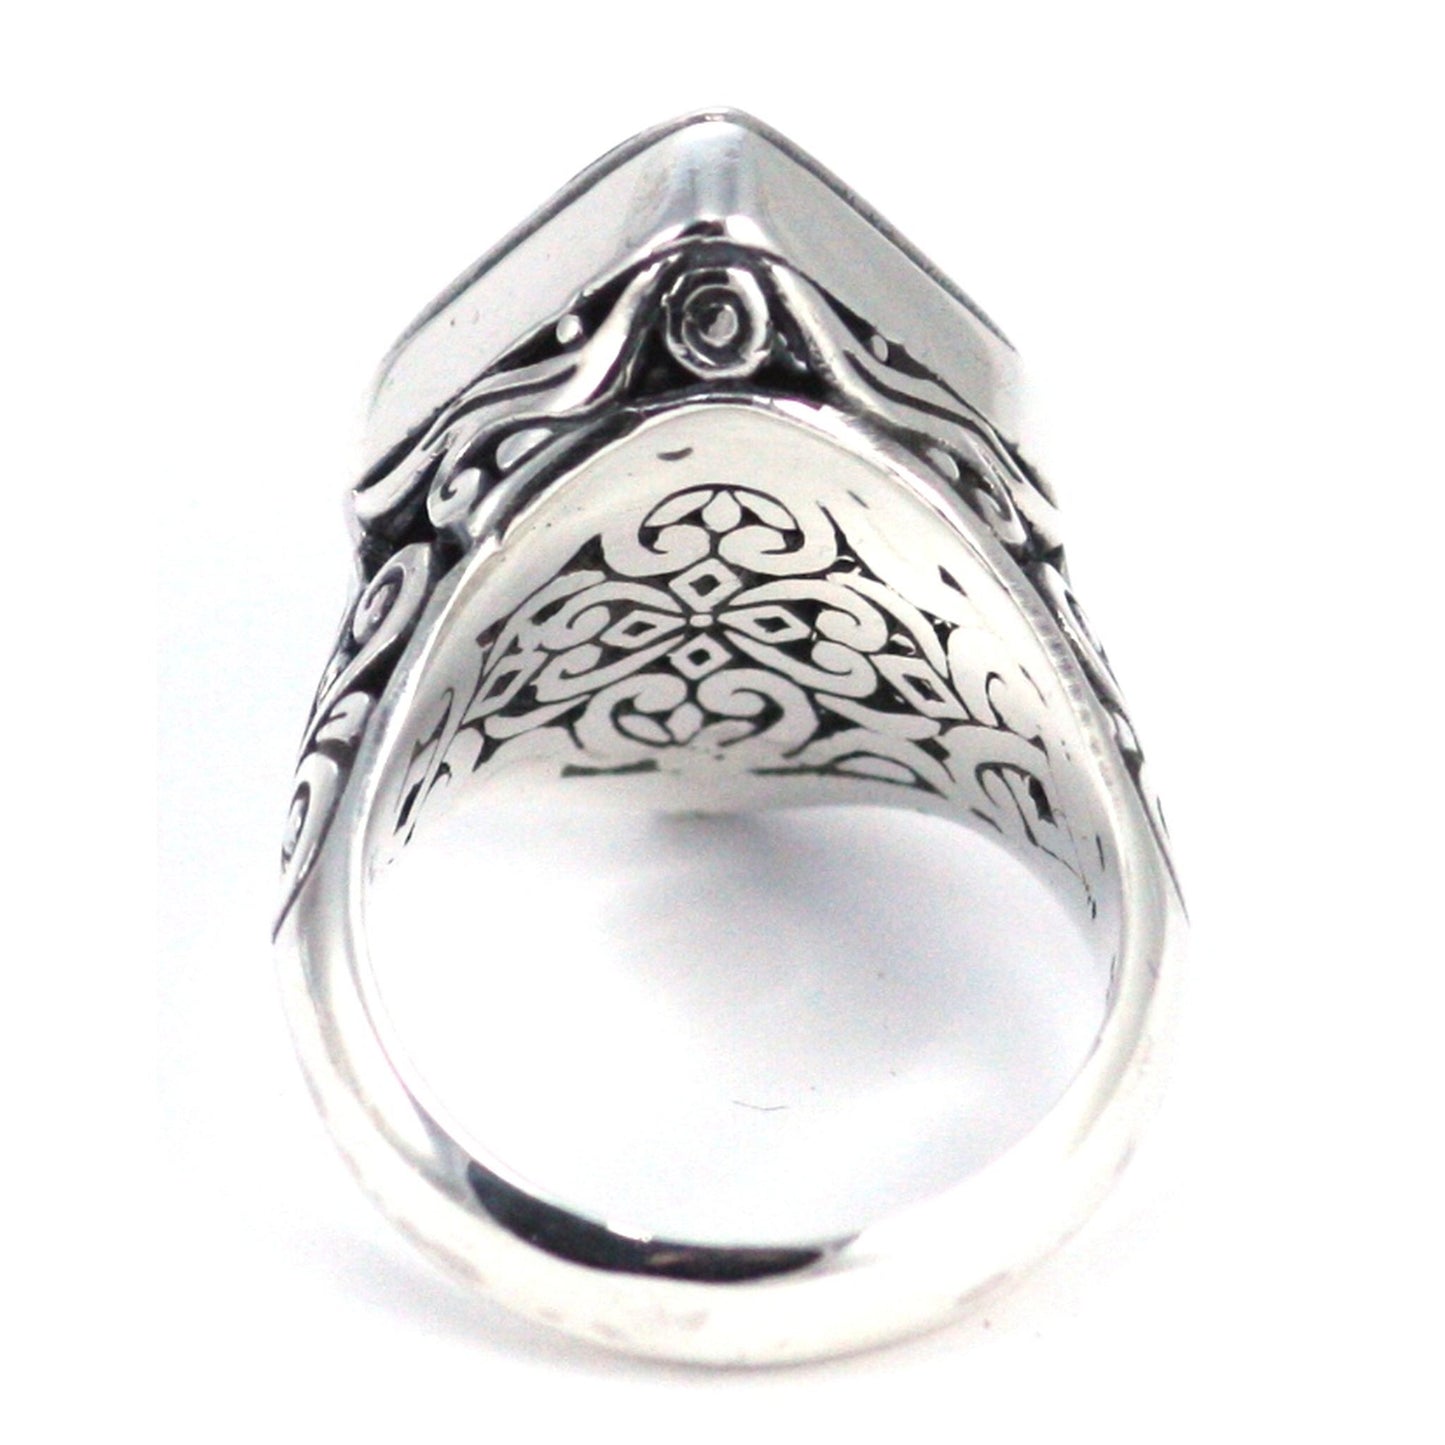 R763 size 6 LIMITED .925 Sterling Silver Ornate Filigree Ring